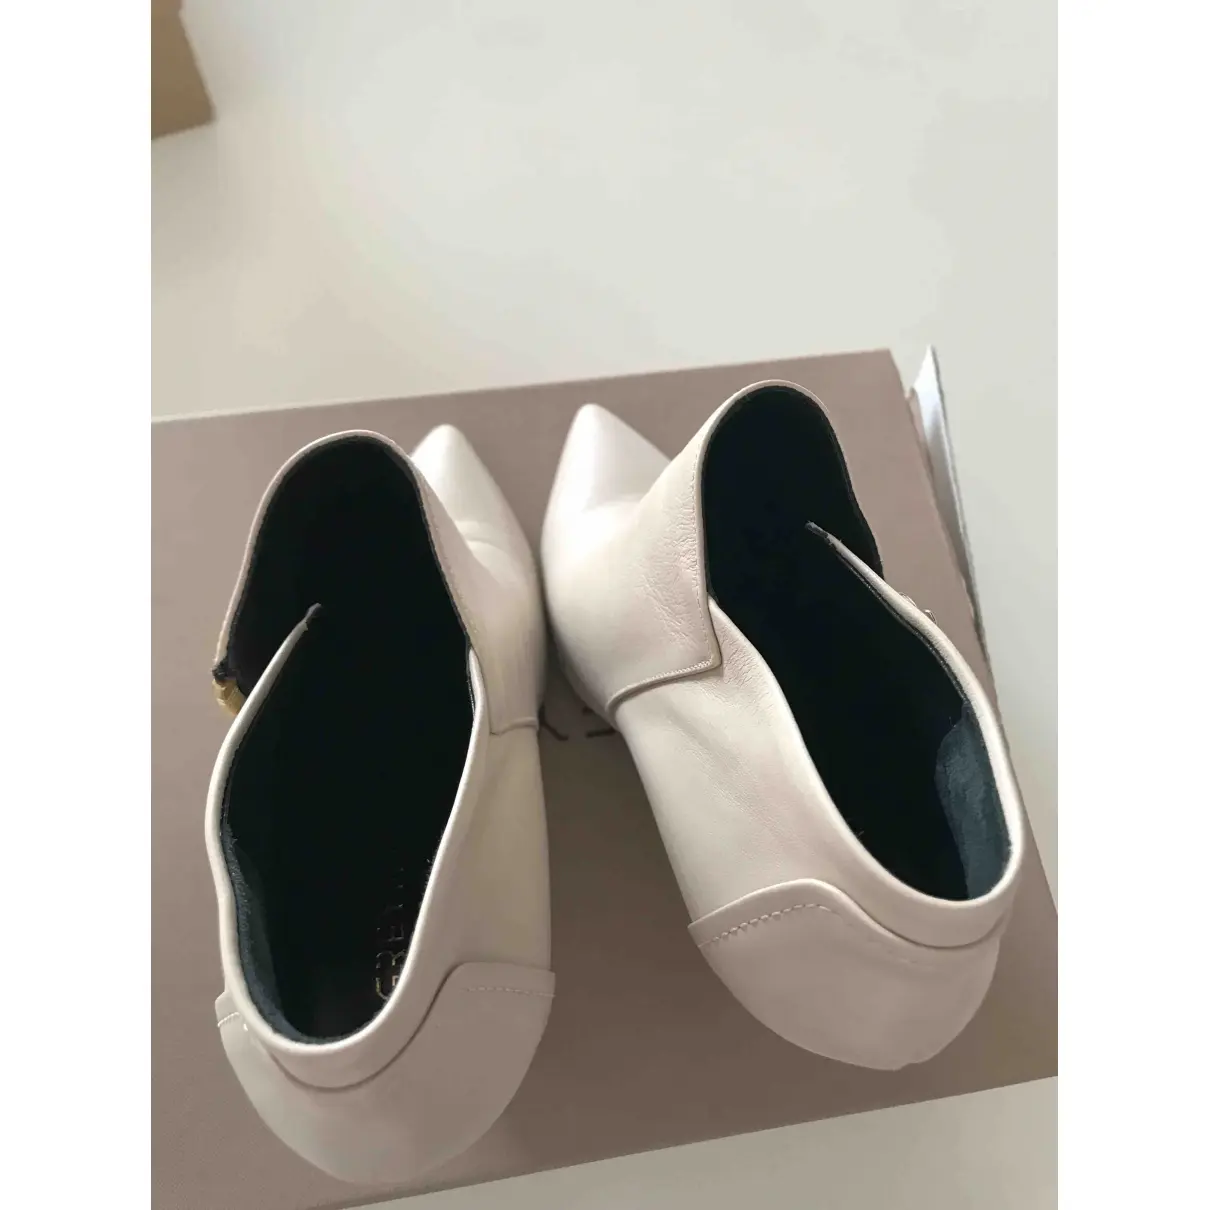 Grey Mer Leather heels for sale